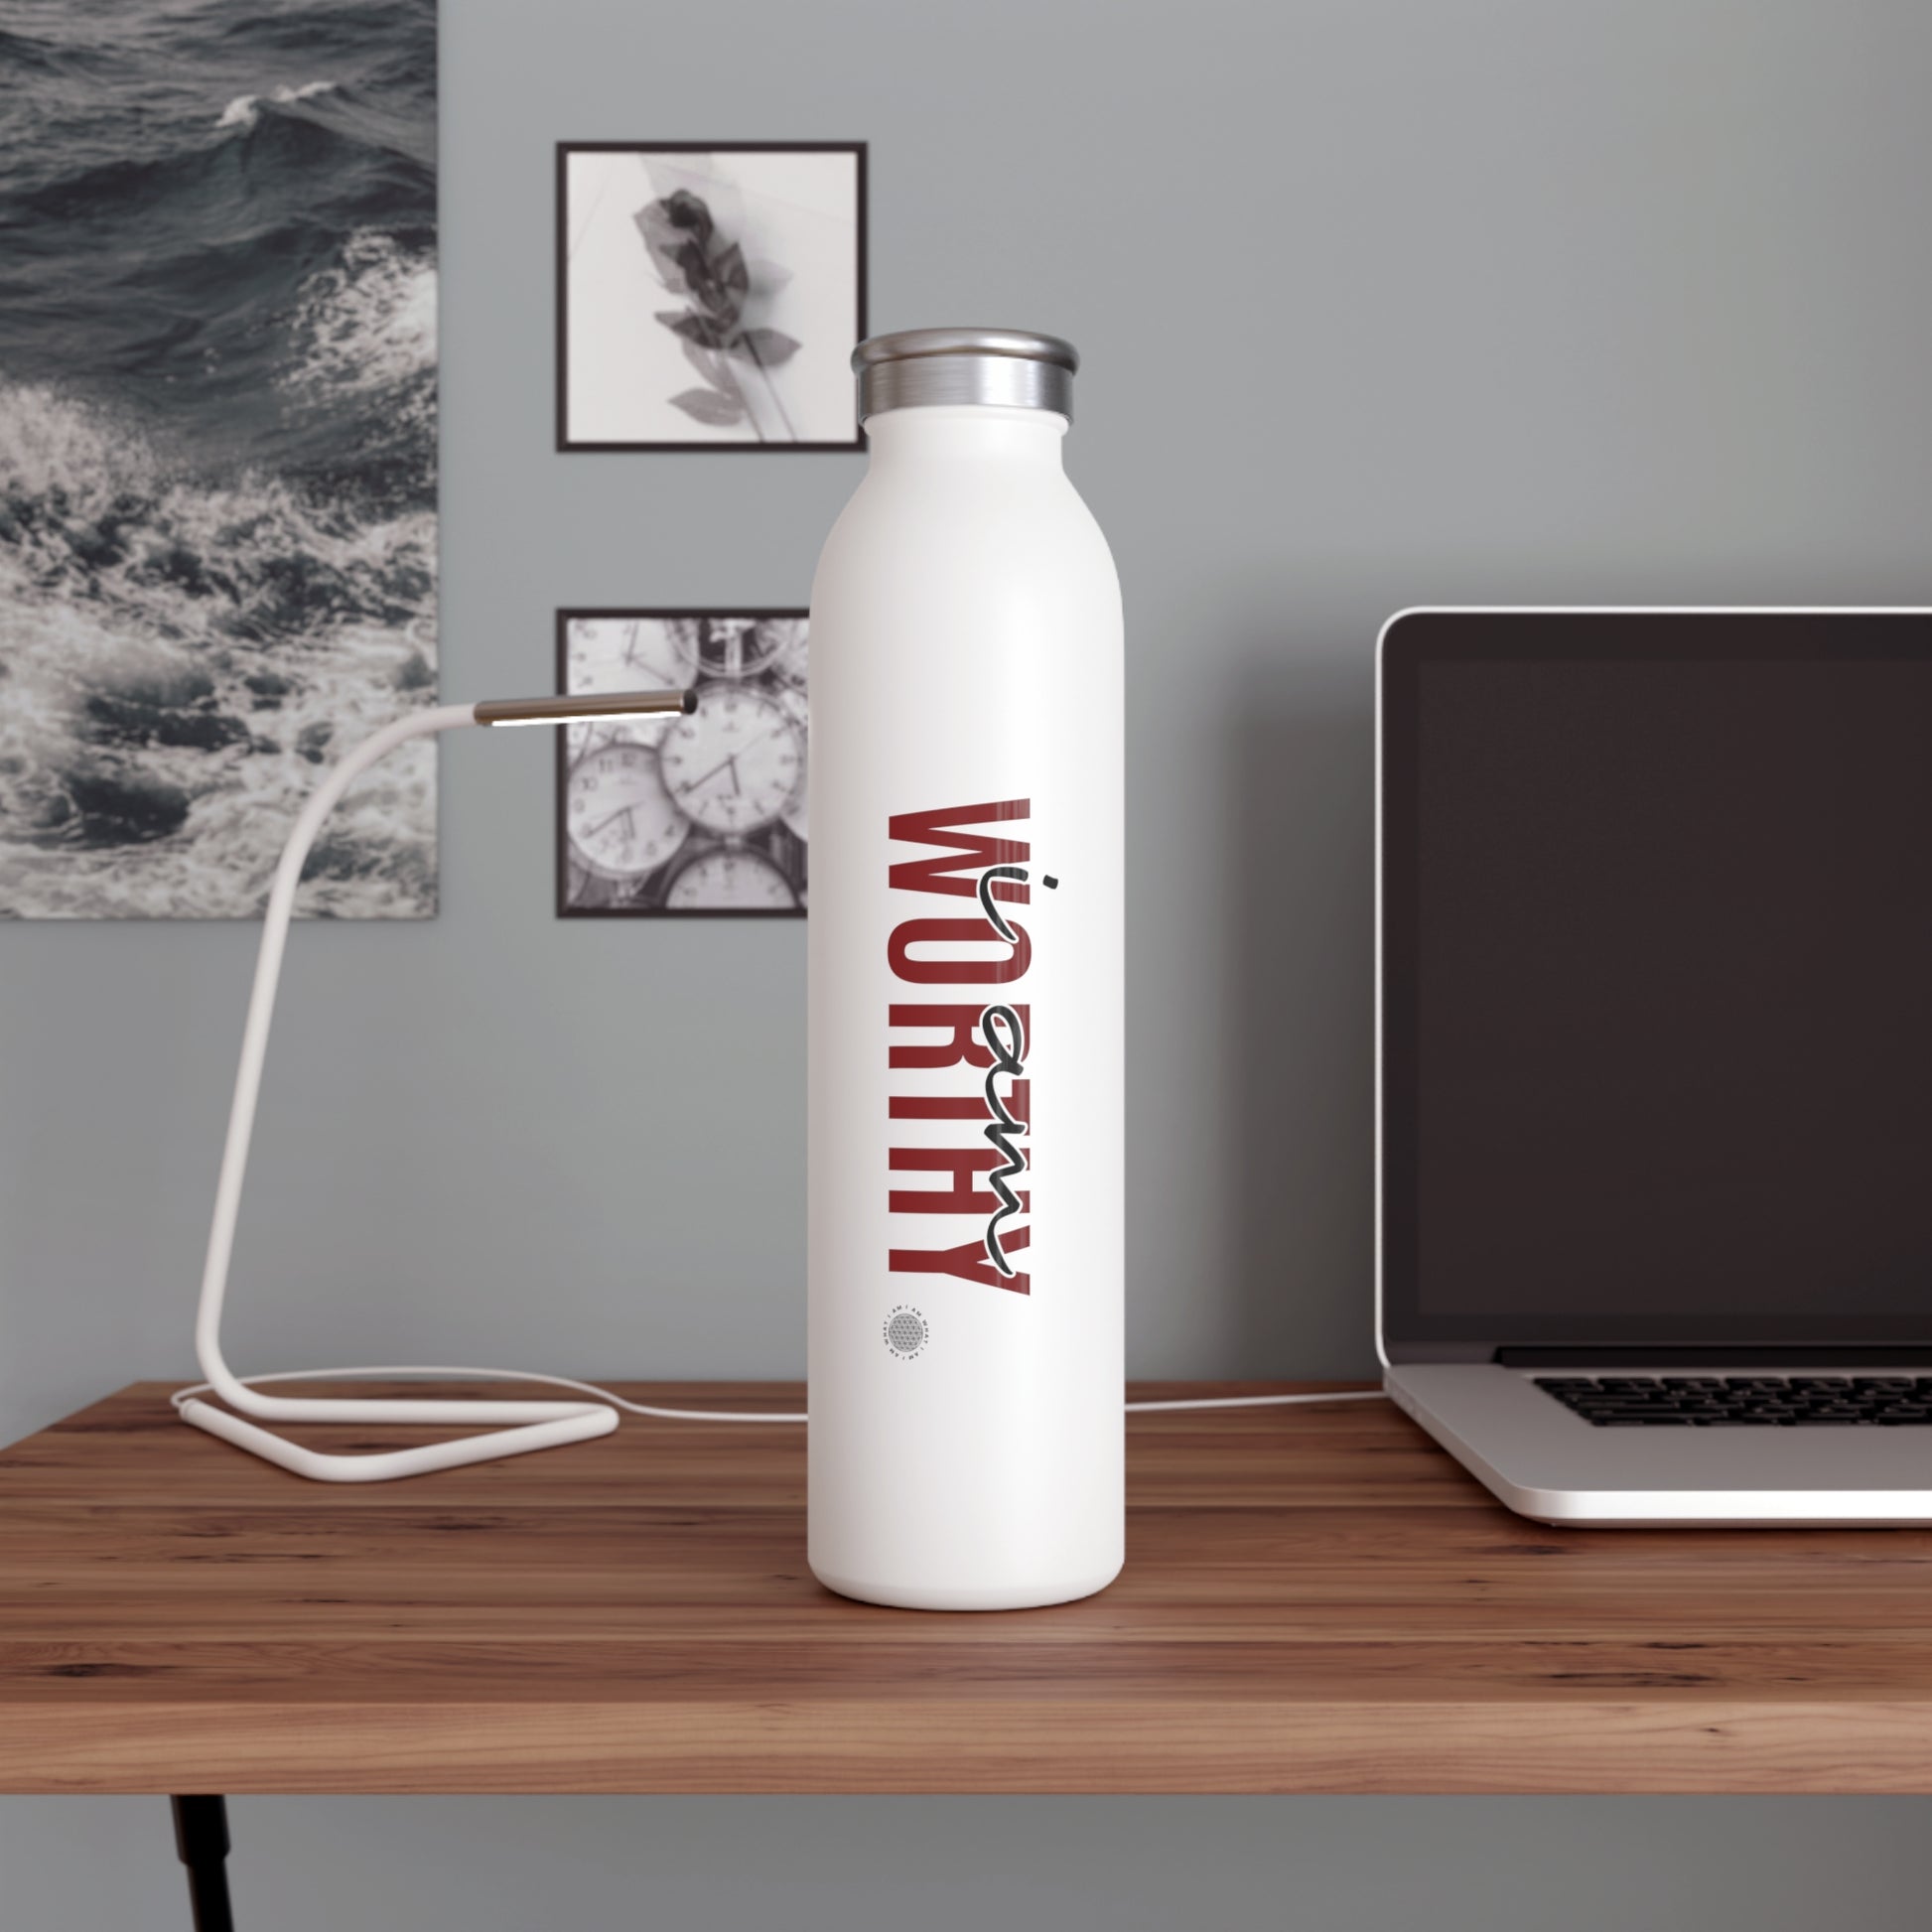 Our I Am Worthy Slim Water Bottle is the perfect way to stay hydrated on the go. This sleek and stylish bottle is made from durable stainless steel and features a double-walled vacuum insulation to keep your drinks cold for up to 24 hours.